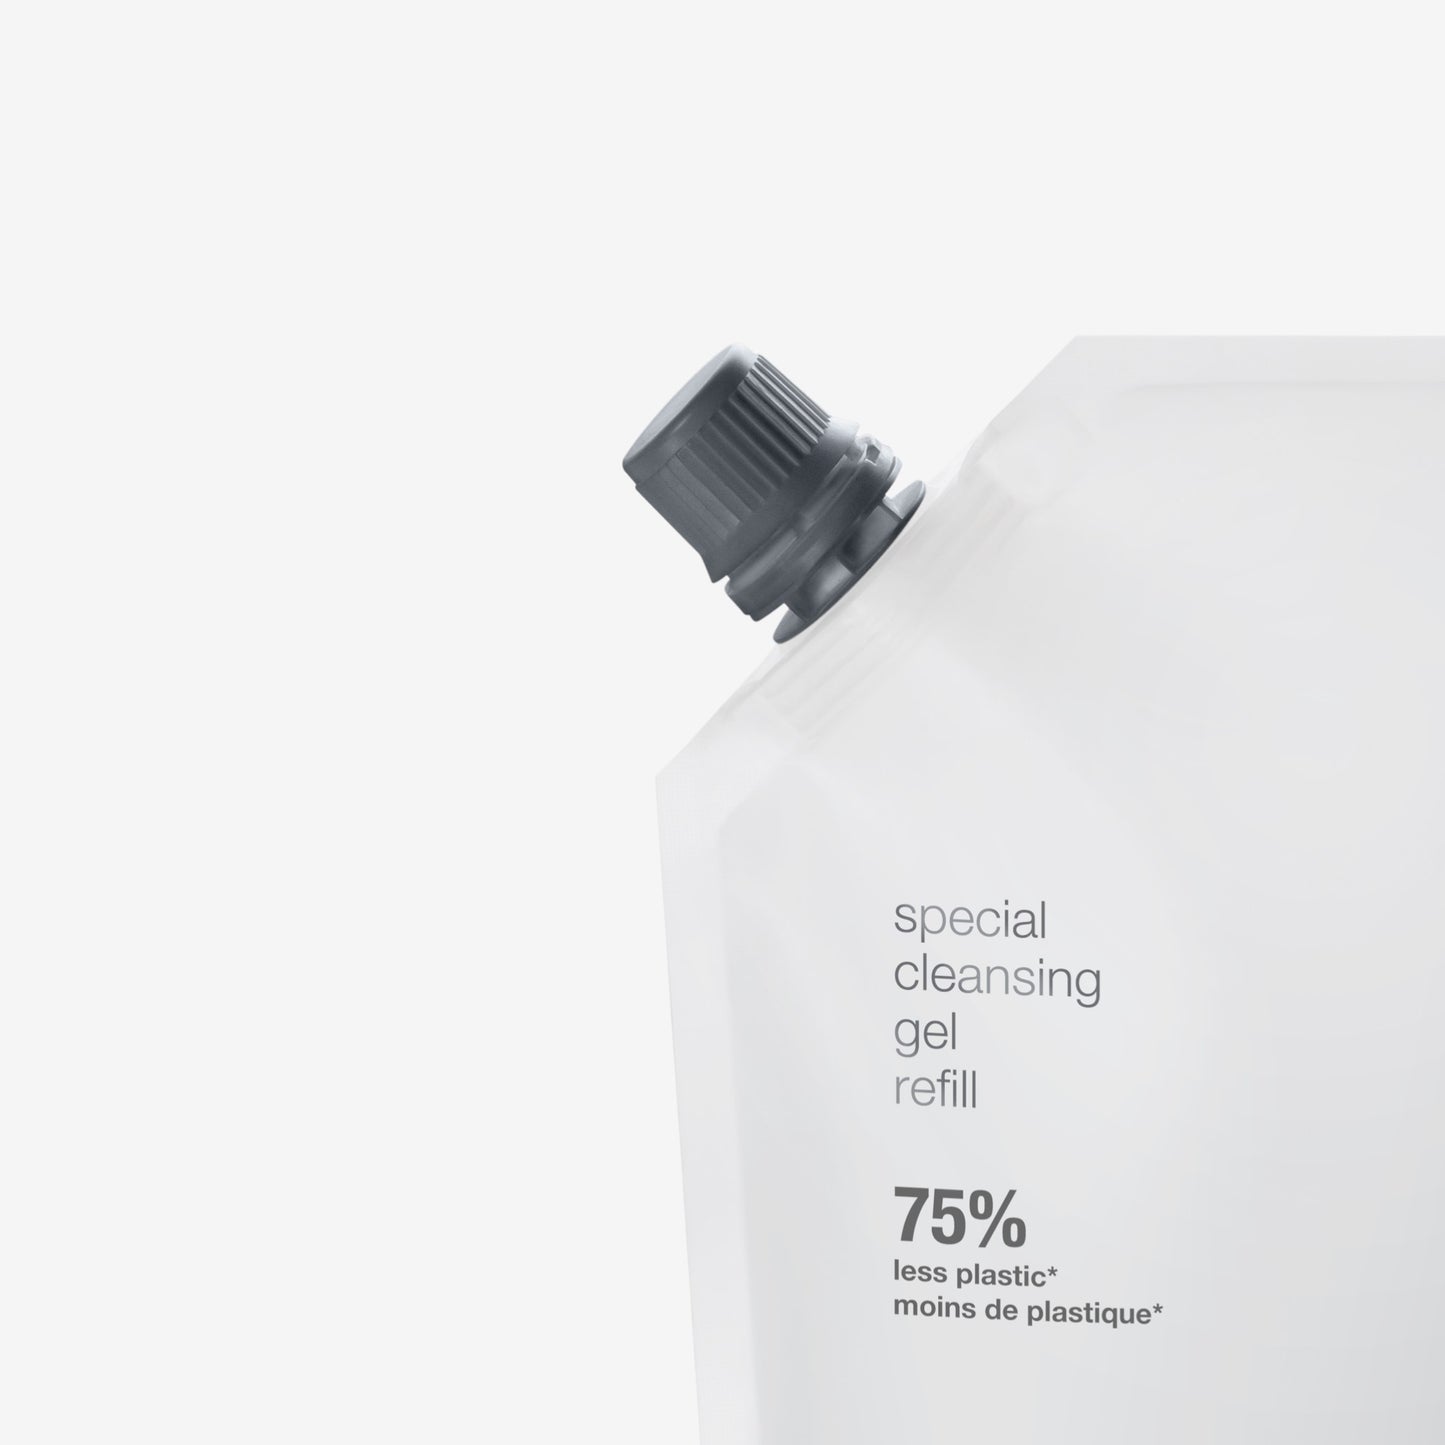 special cleansing gel refill